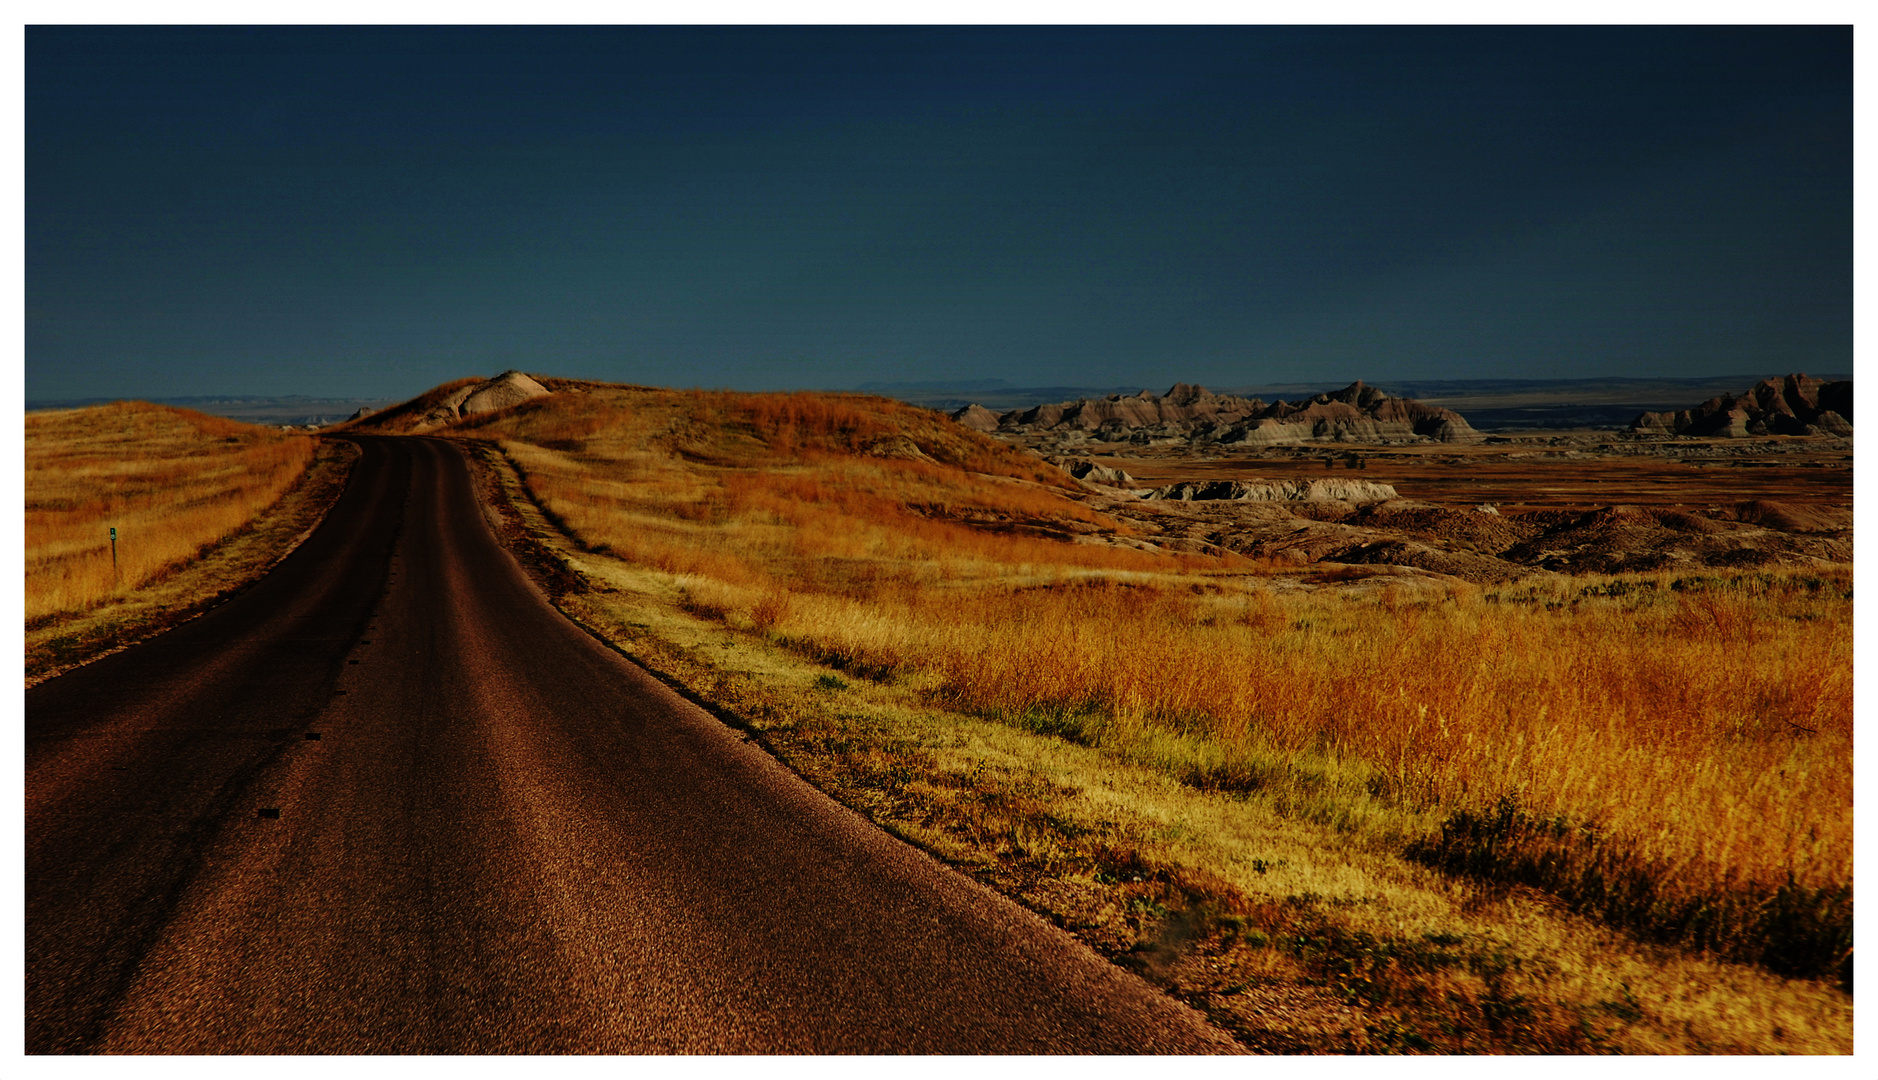 On the road across the Badlands